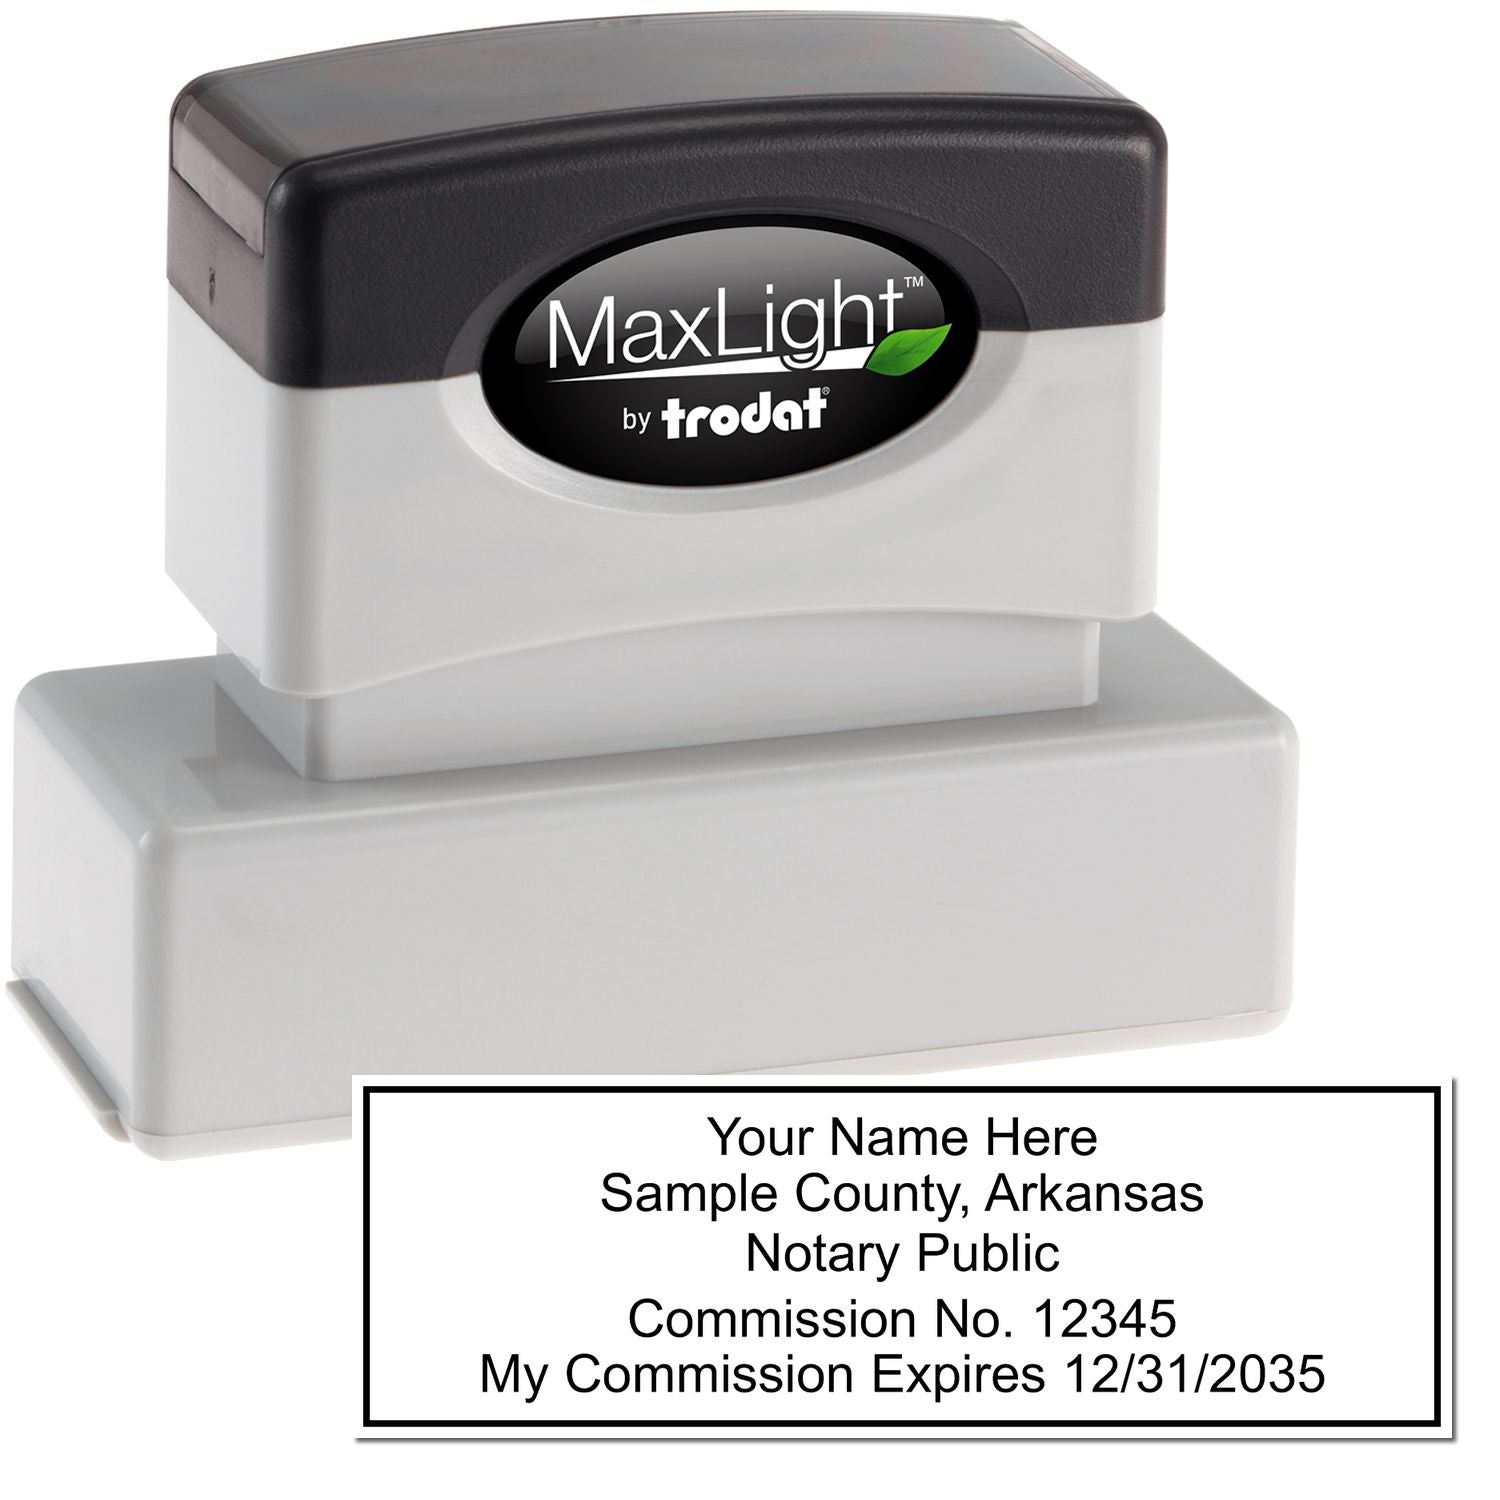 The main image for the MaxLight Premium Pre-Inked Arkansas Rectangular Notarial Stamp depicting a sample of the imprint and electronic files